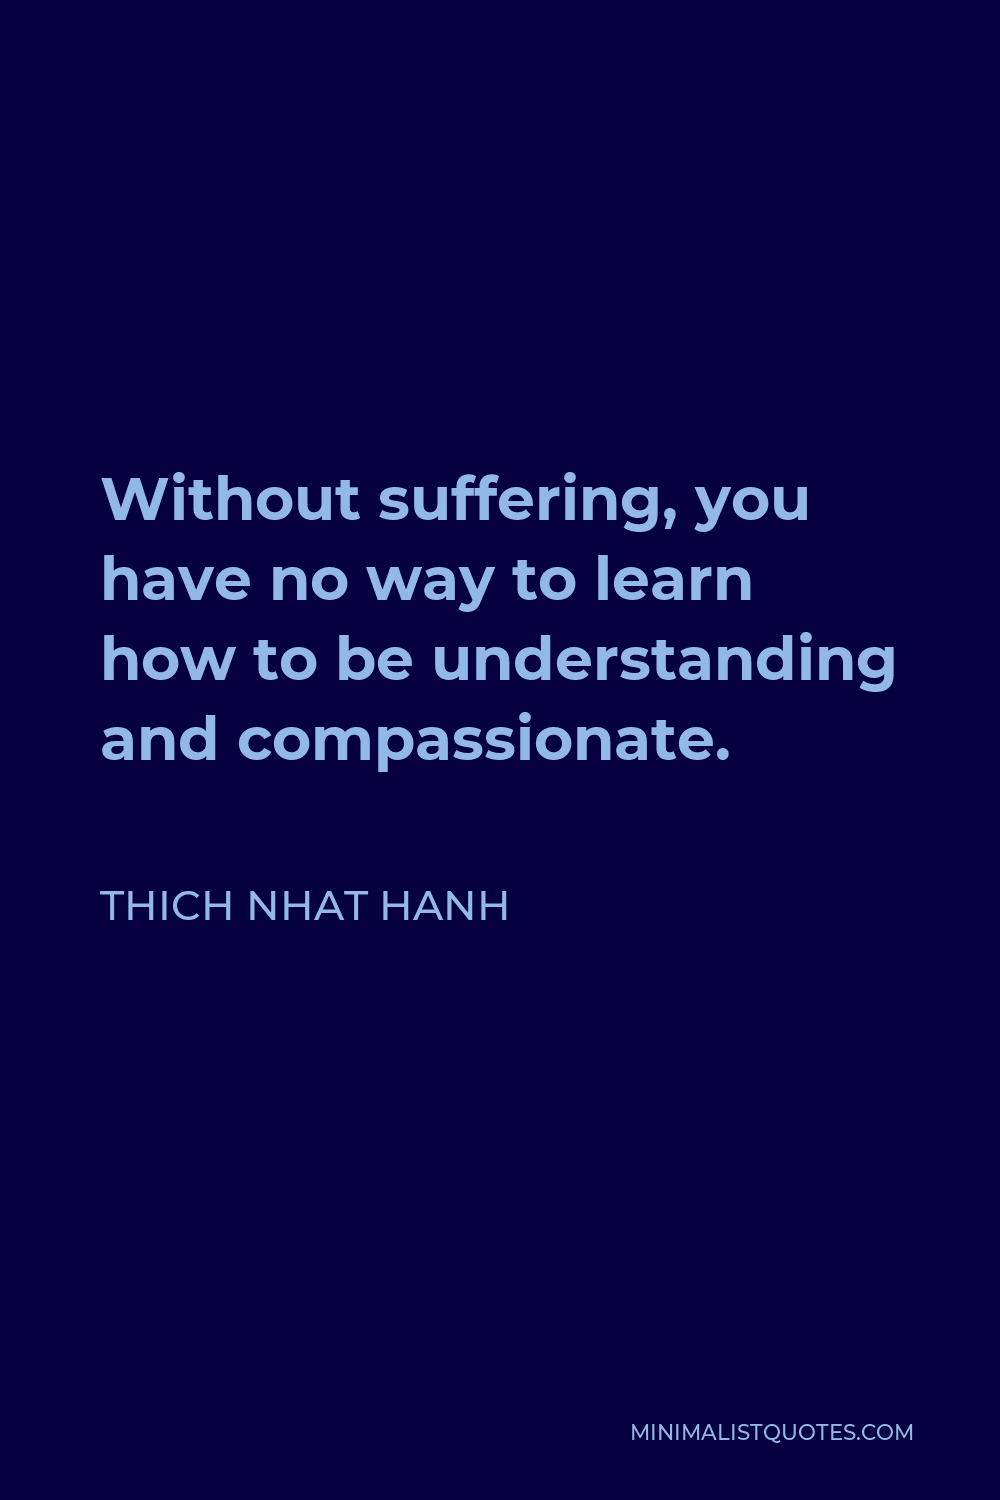 Thich Nhat Hanh Quote - Without suffering, you have no way to learn how to be understanding and compassionate.